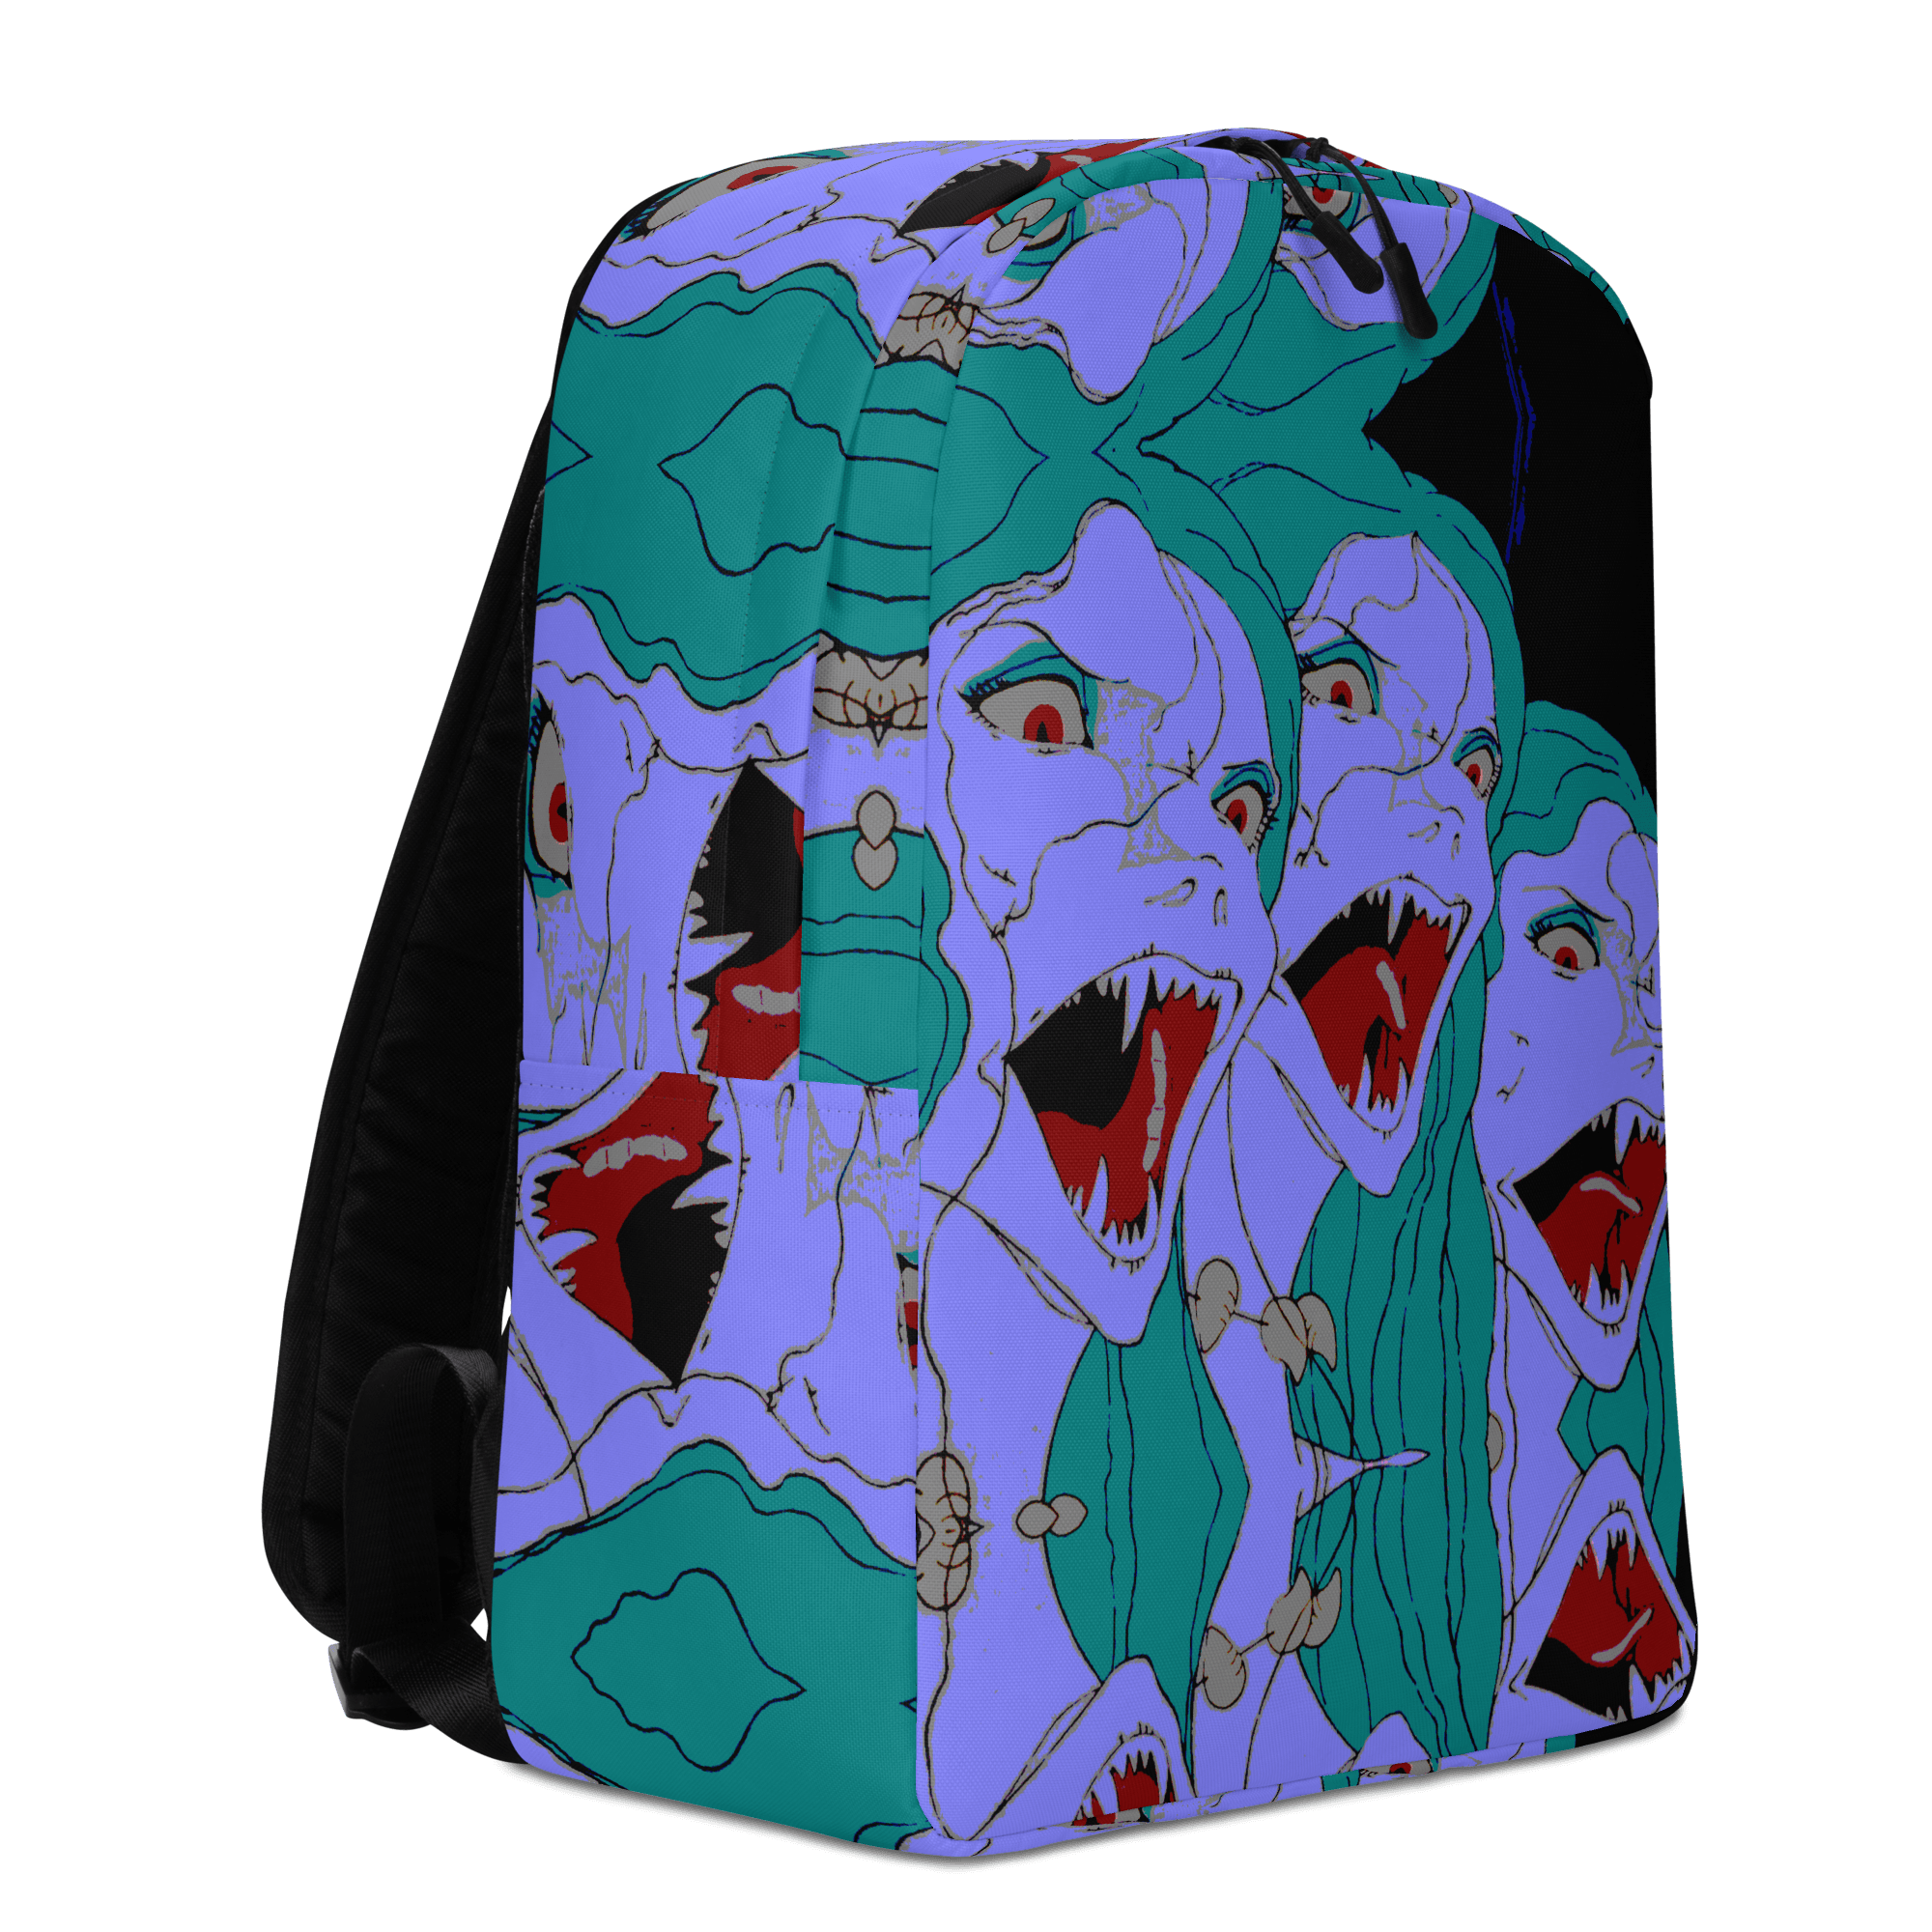 3x3® Backpack (only 2/2 units for sale) - Kikillo Club